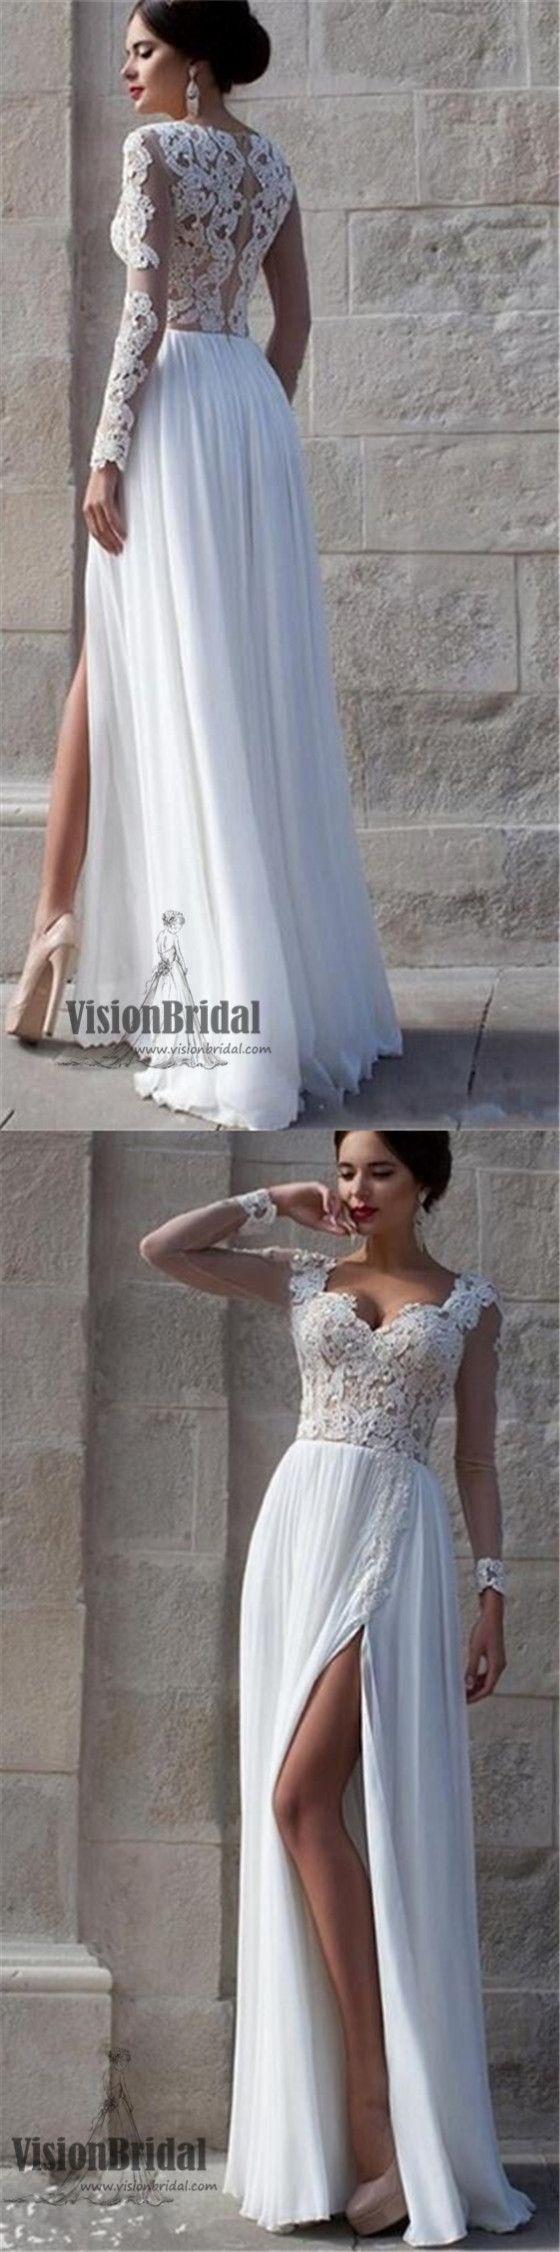 Hochzeit - Top See Through White Sweetheart Lace Tulle Prom Dress, Long Sleeves Side Slit Charming Prom Dress, Prom Dresses, VB0202